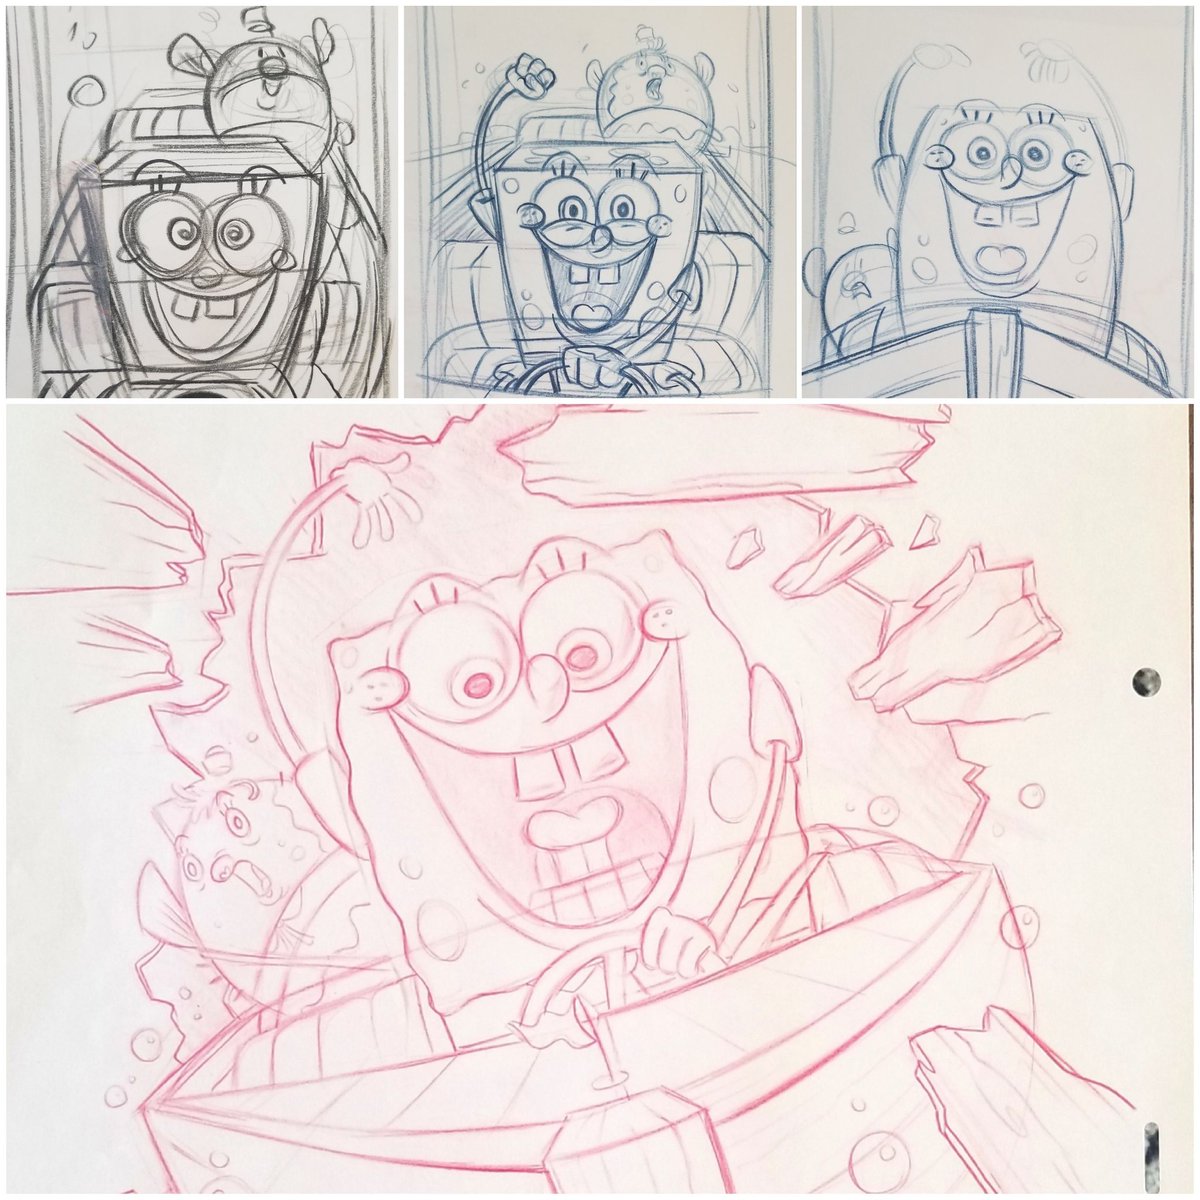 Spongebob Season 4 DVD concept roughs and cleanup. I can't remember if this is the outer sleeve or insert.  #spongebob